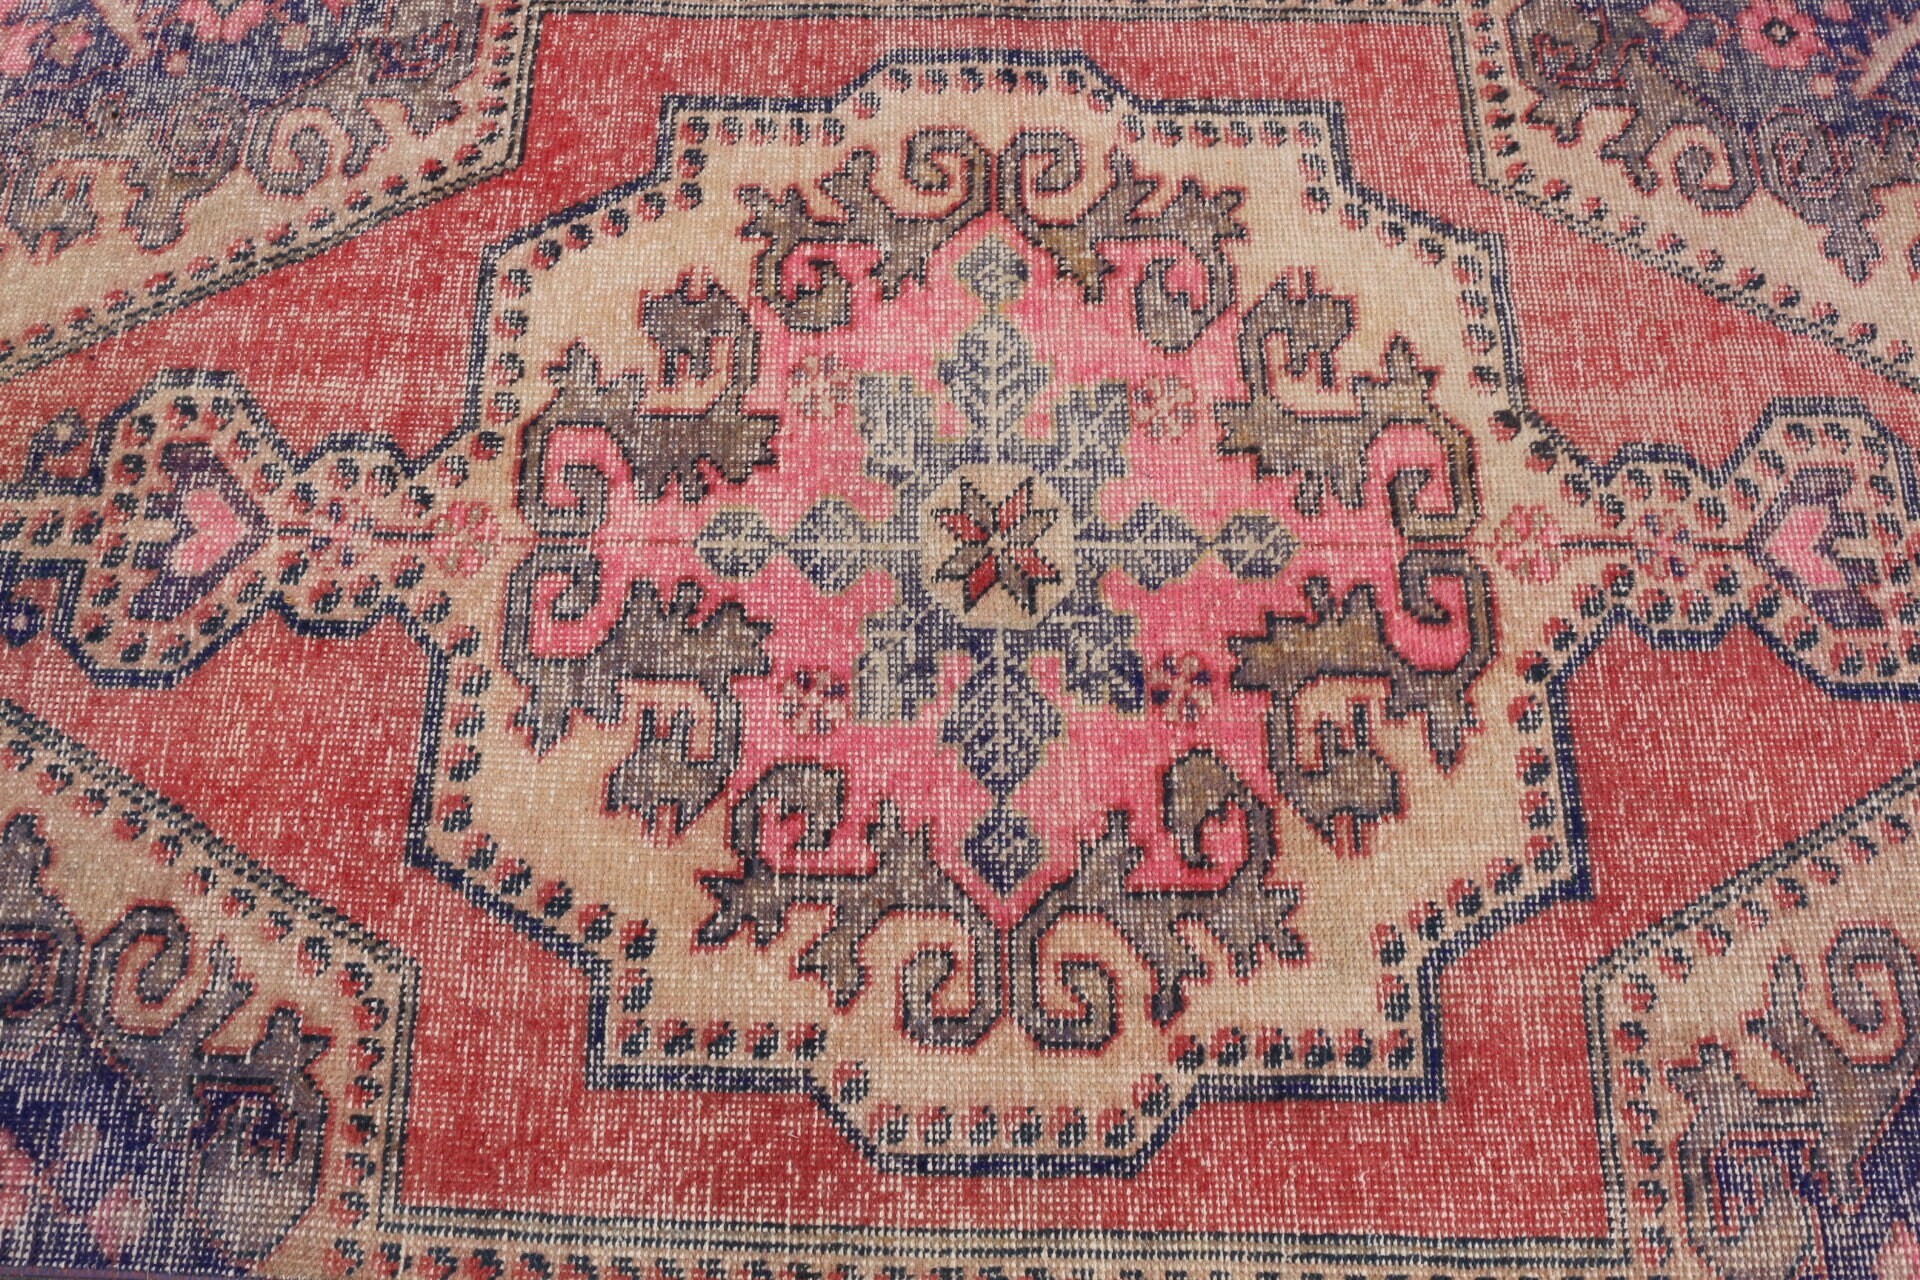 Entry Rugs, Turkish Rug, Wool Rug, Kitchen Rug, Rugs for Kitchen, Vintage Rugs, Floor Rugs, Red  3.5x6.3 ft Accent Rug